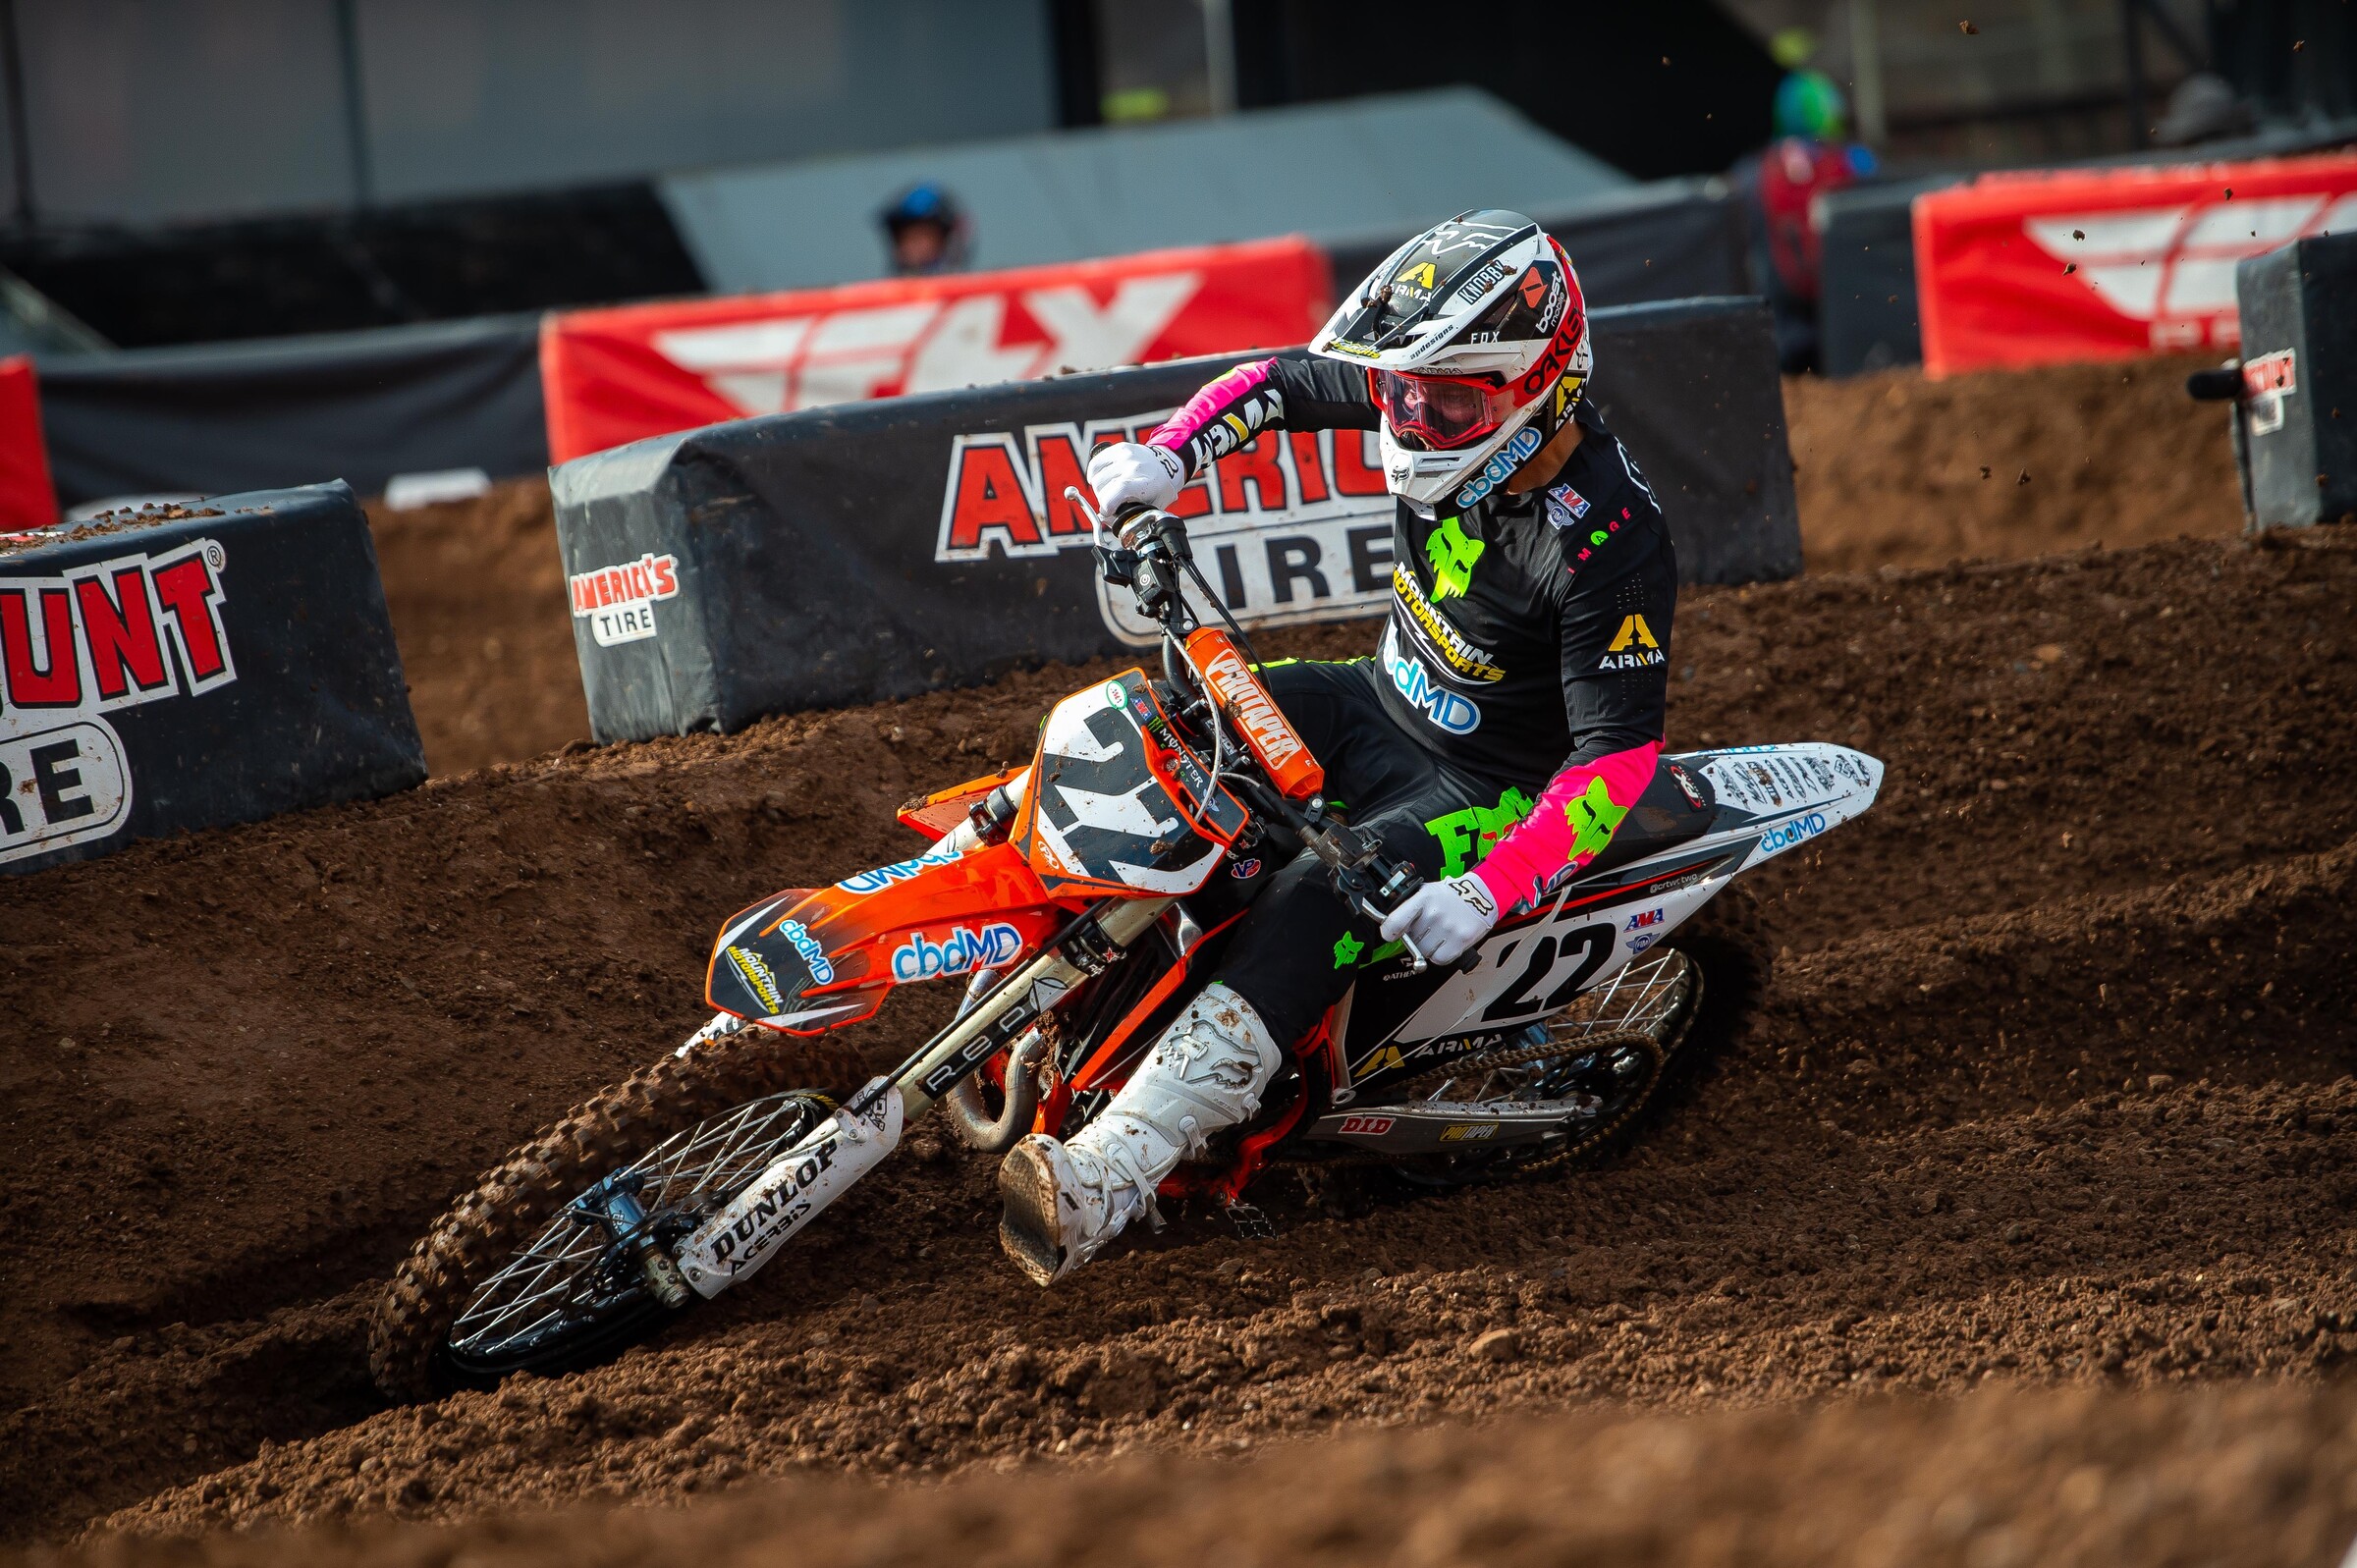 Chad Reed last raced at the 2020 Salt Lake City 7 Supercross.